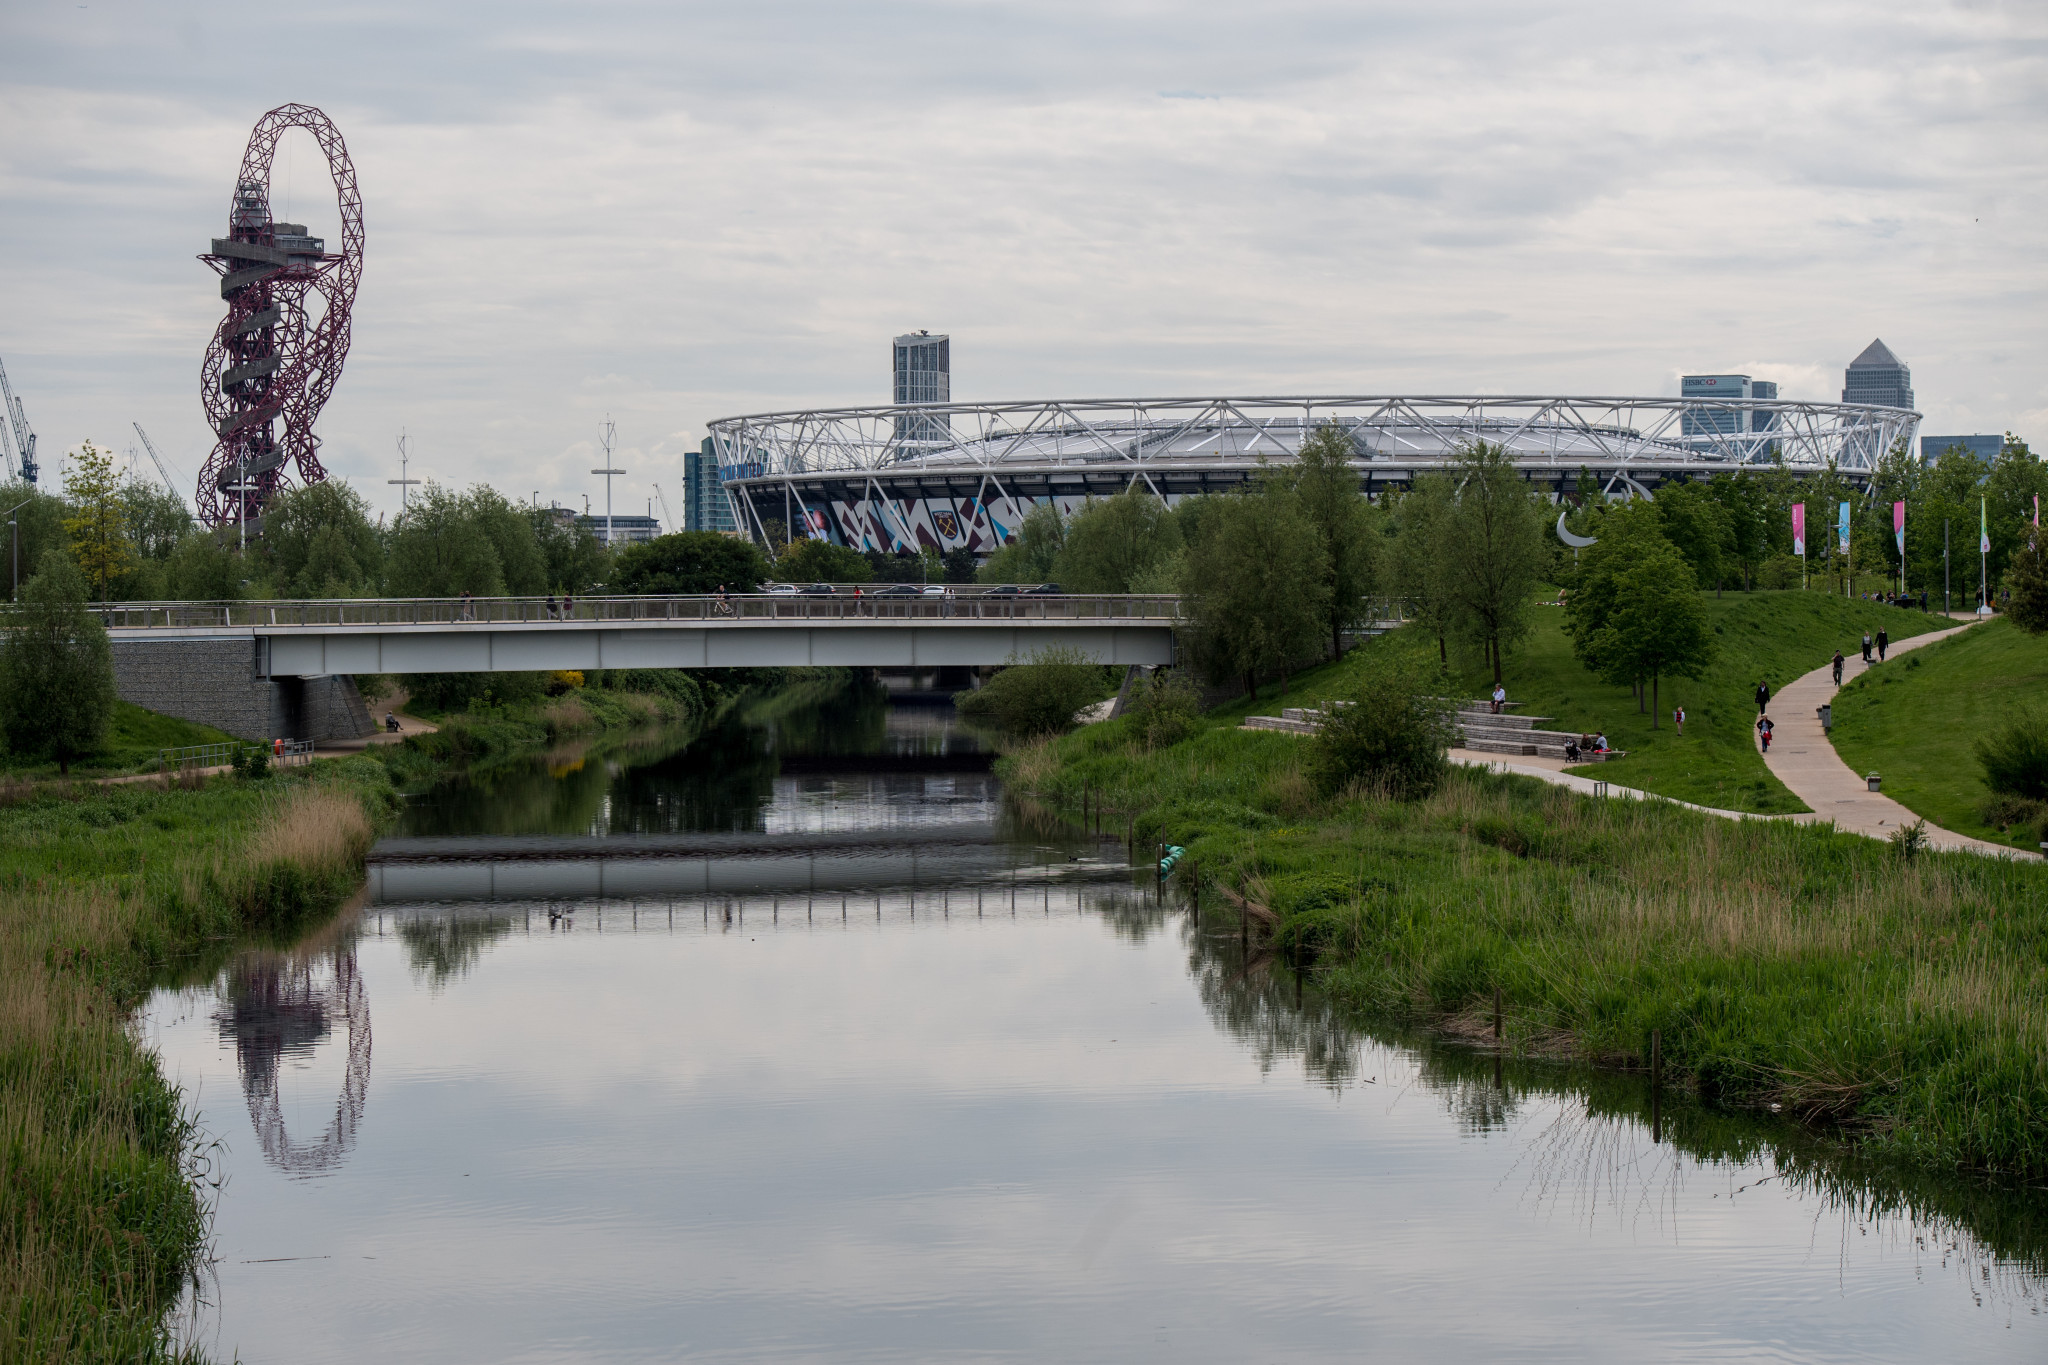 London's East End has been transformed by the building of the Olympic Park - but who's telling the story post-2012 ow that the Organising Committee has disbanded? ©Getty Images